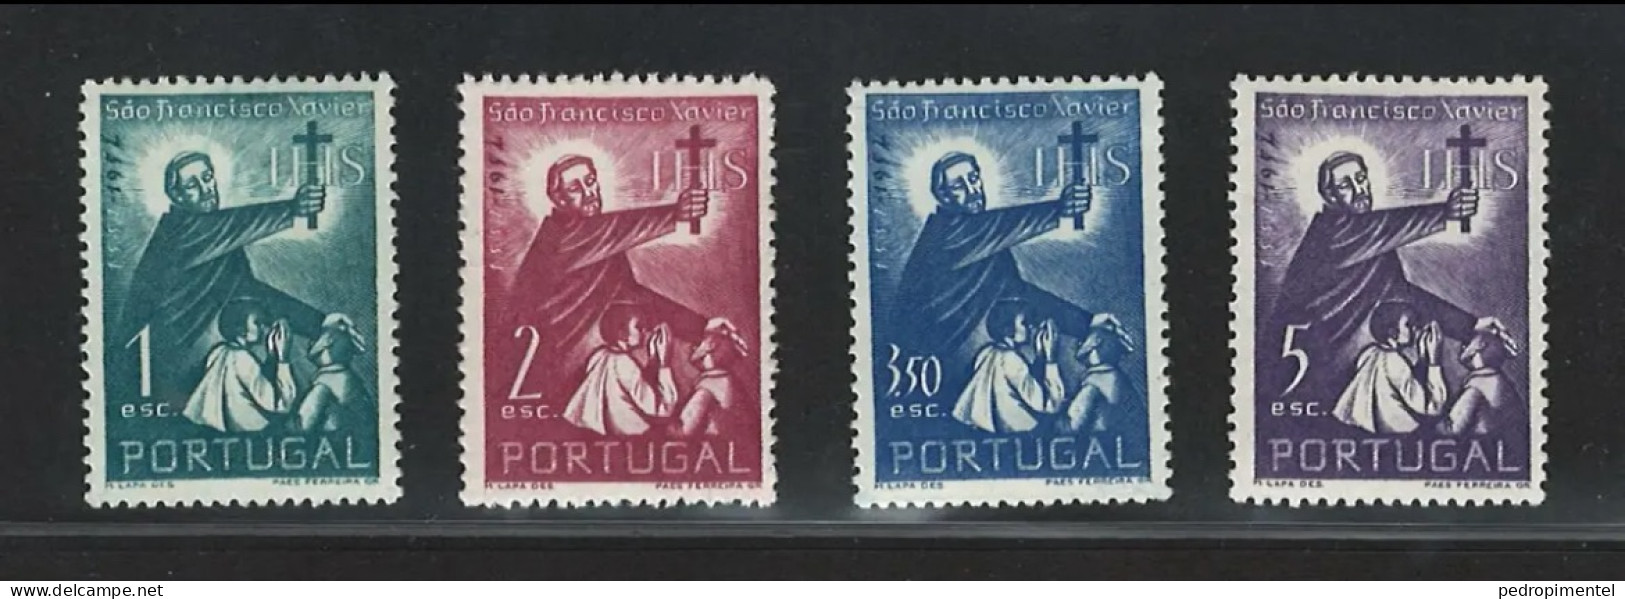 Portugal Stamps 1952 "Saint Francis" Condition MH OG #691-694 - Nuovi